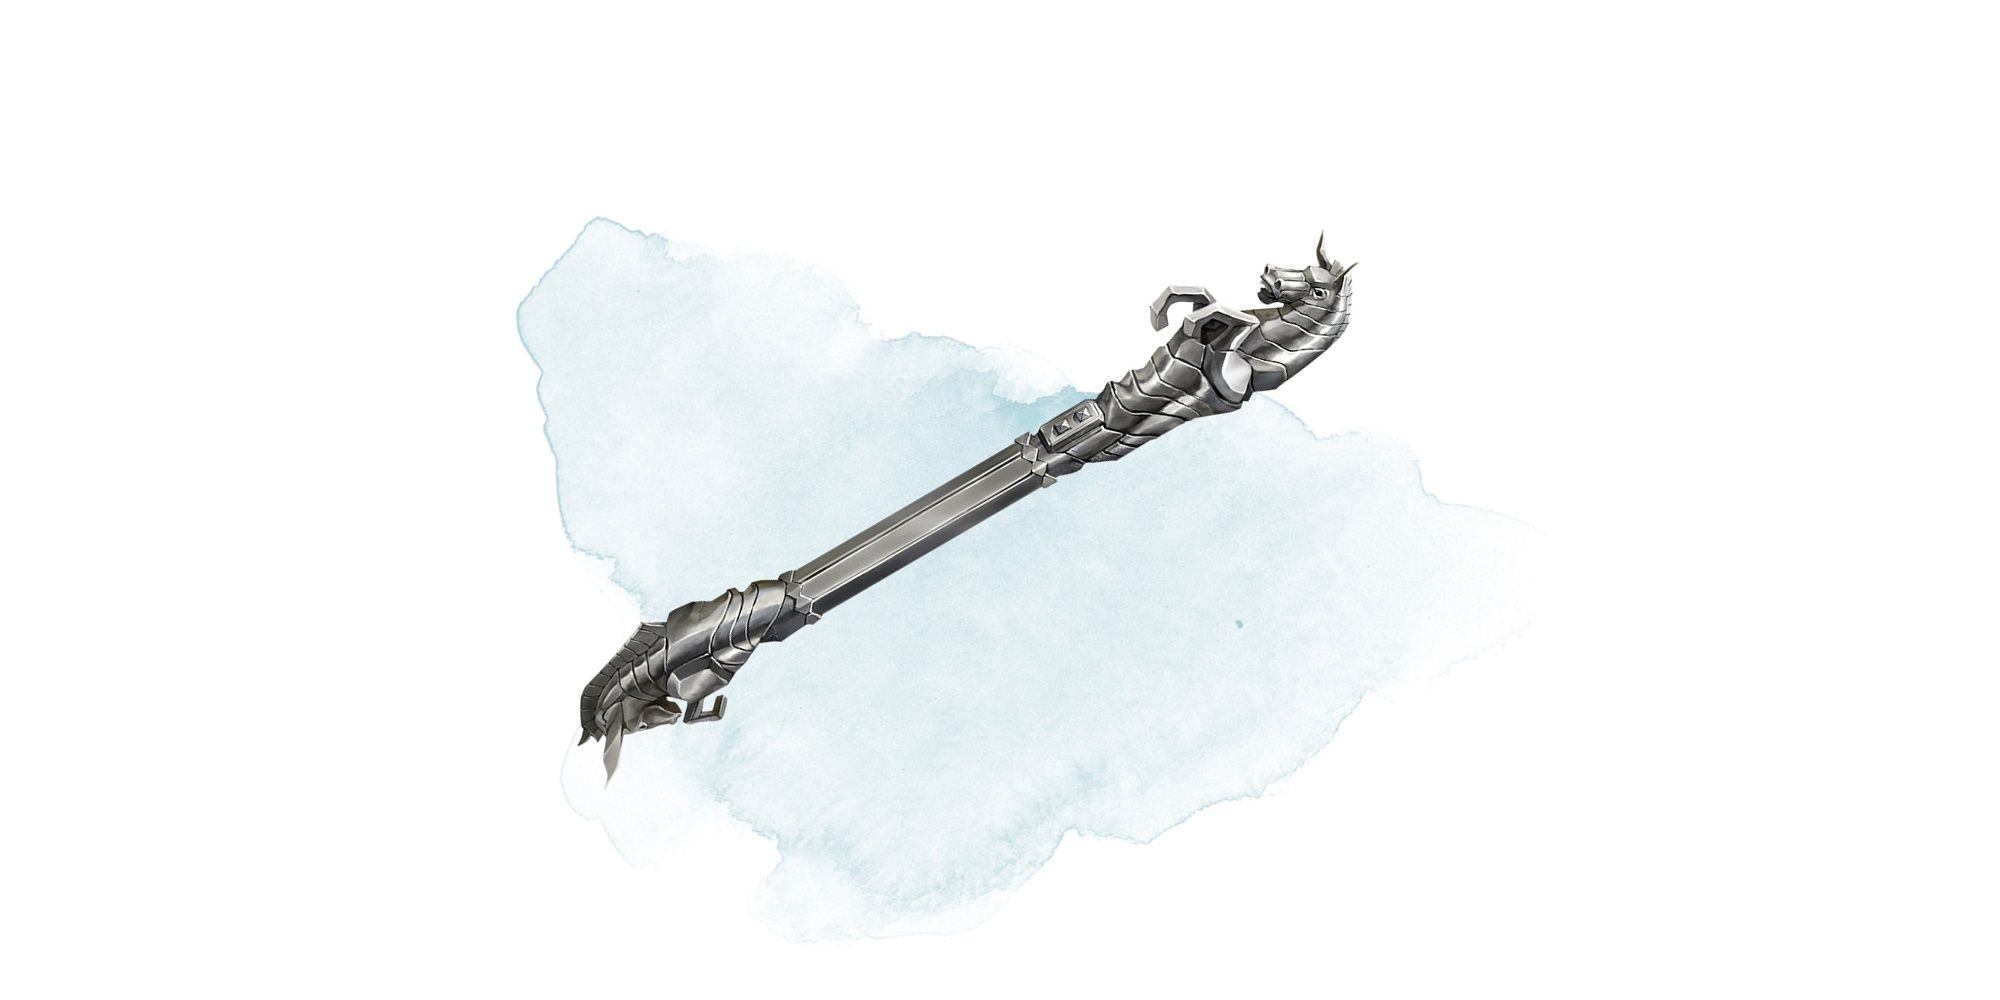 DnD Immovable Rod, a metal staff with engraved horses.